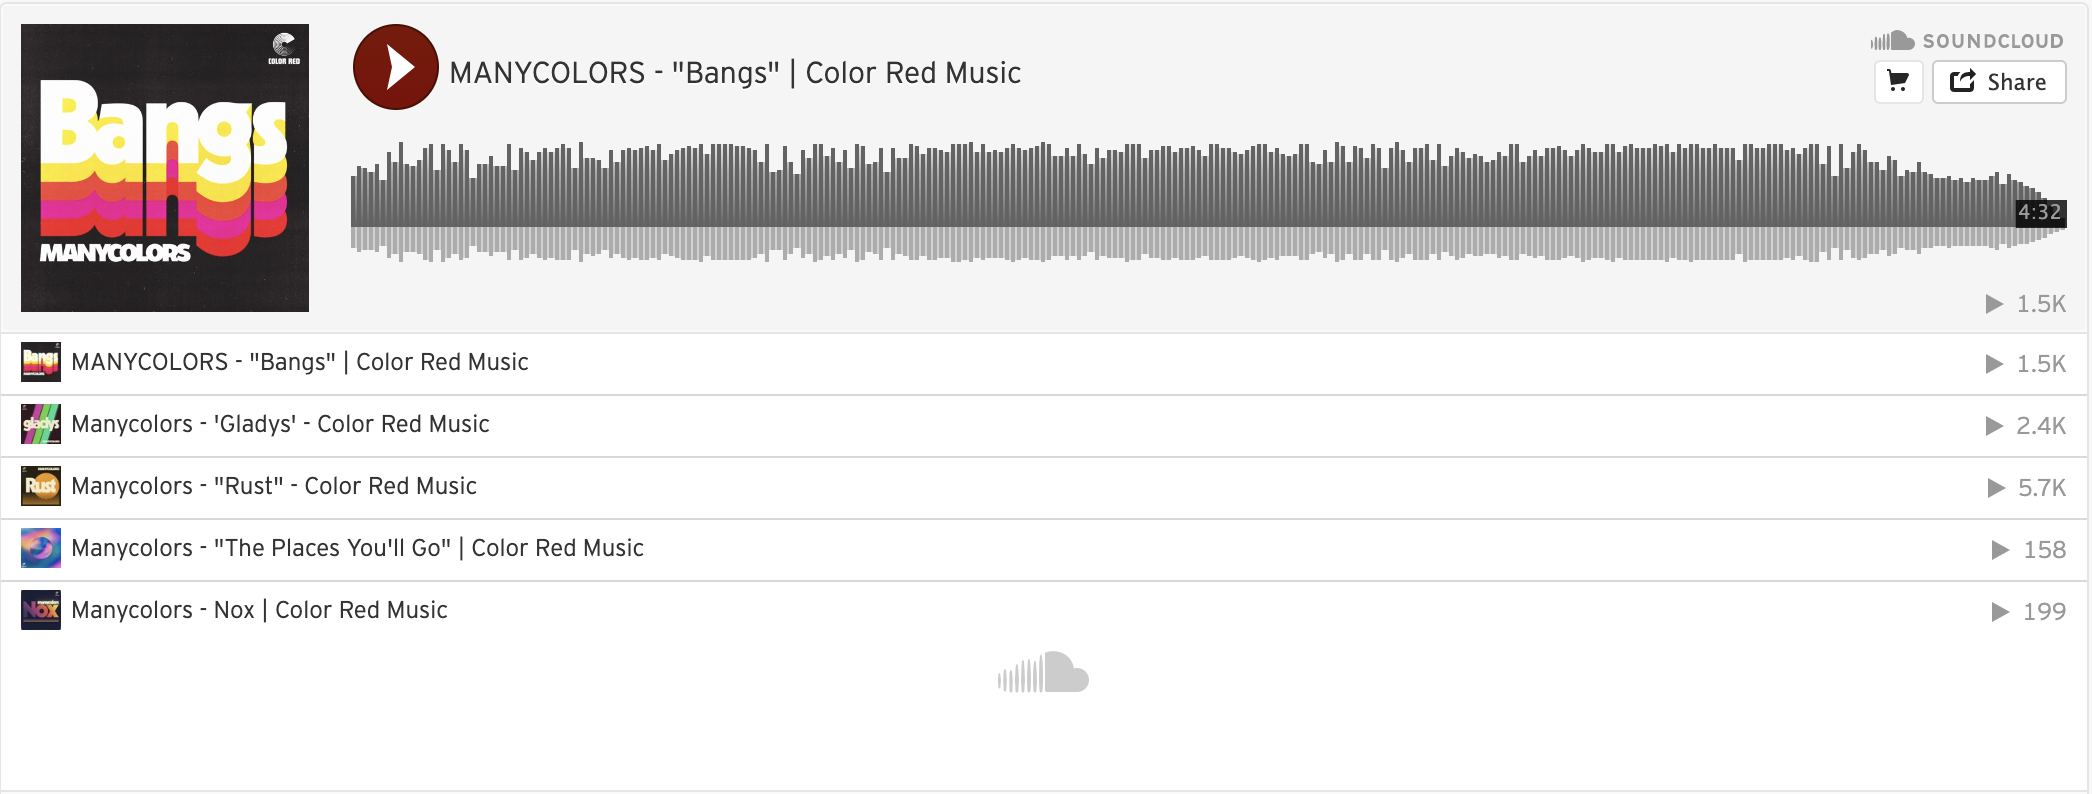 SoundCloud for ManyColors